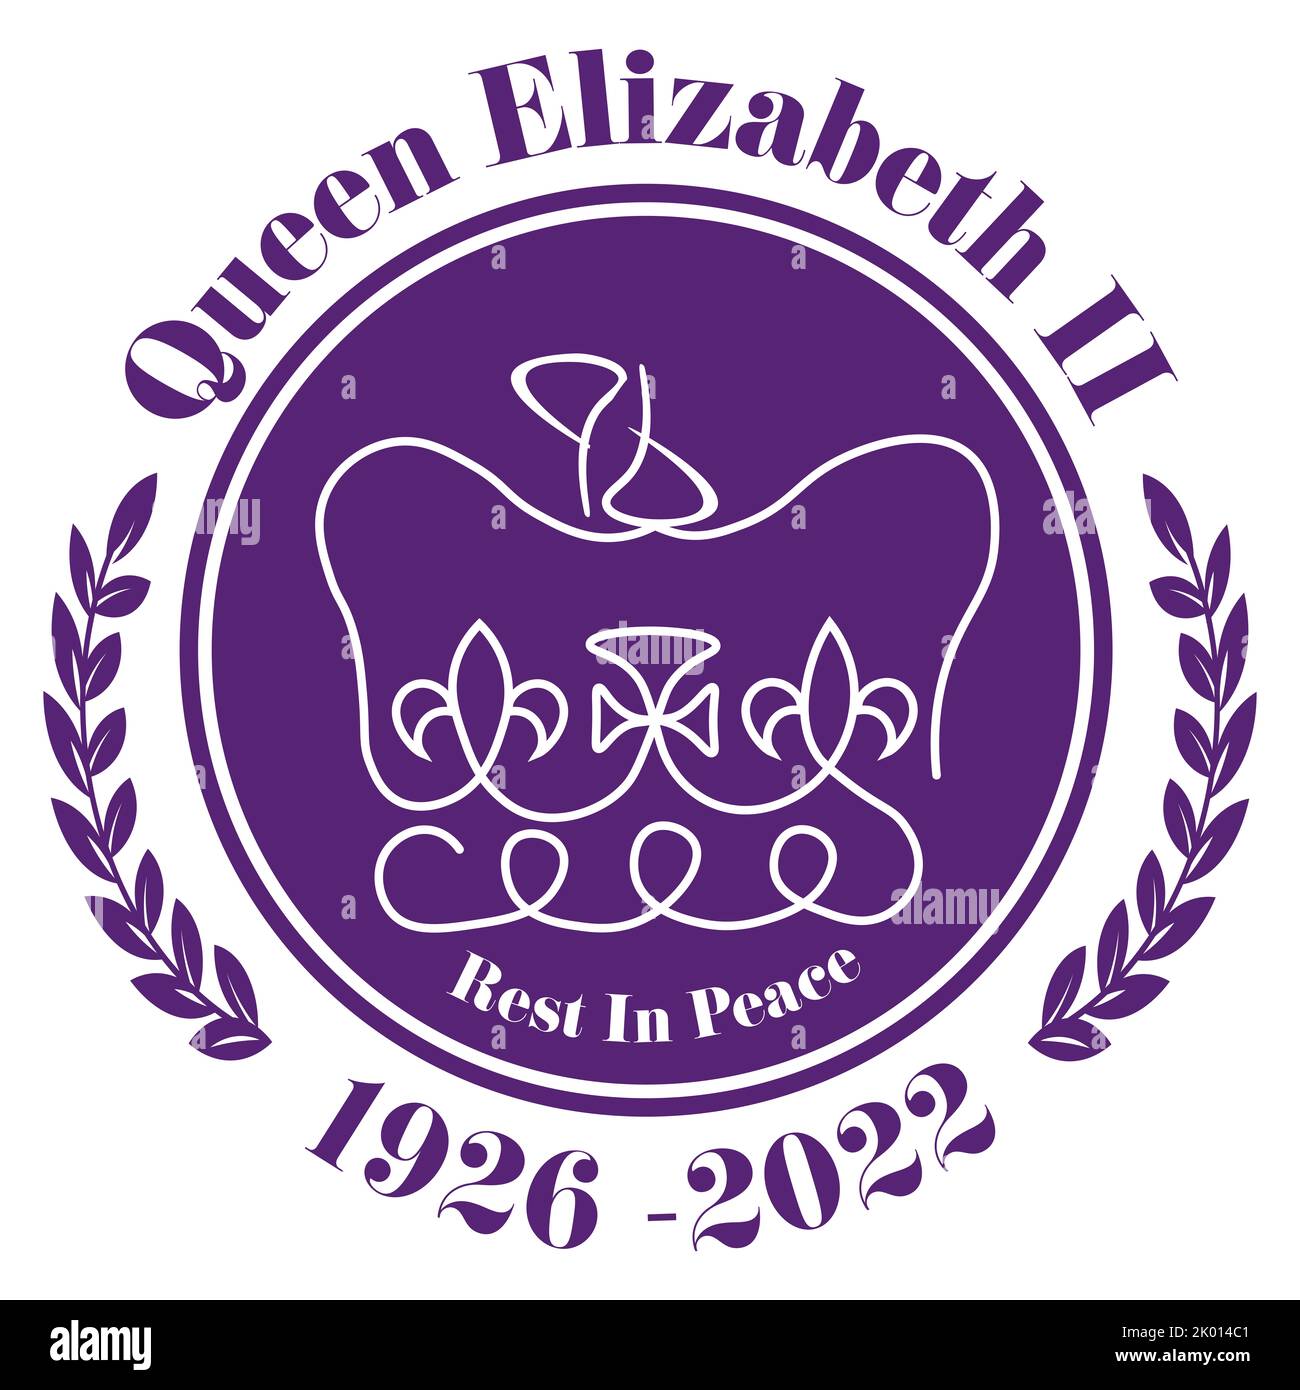 The Queens Death 2022 - Her Majesty The Queen dies aged 96 The British Monarch has served her country for 70 years. Stock Photo